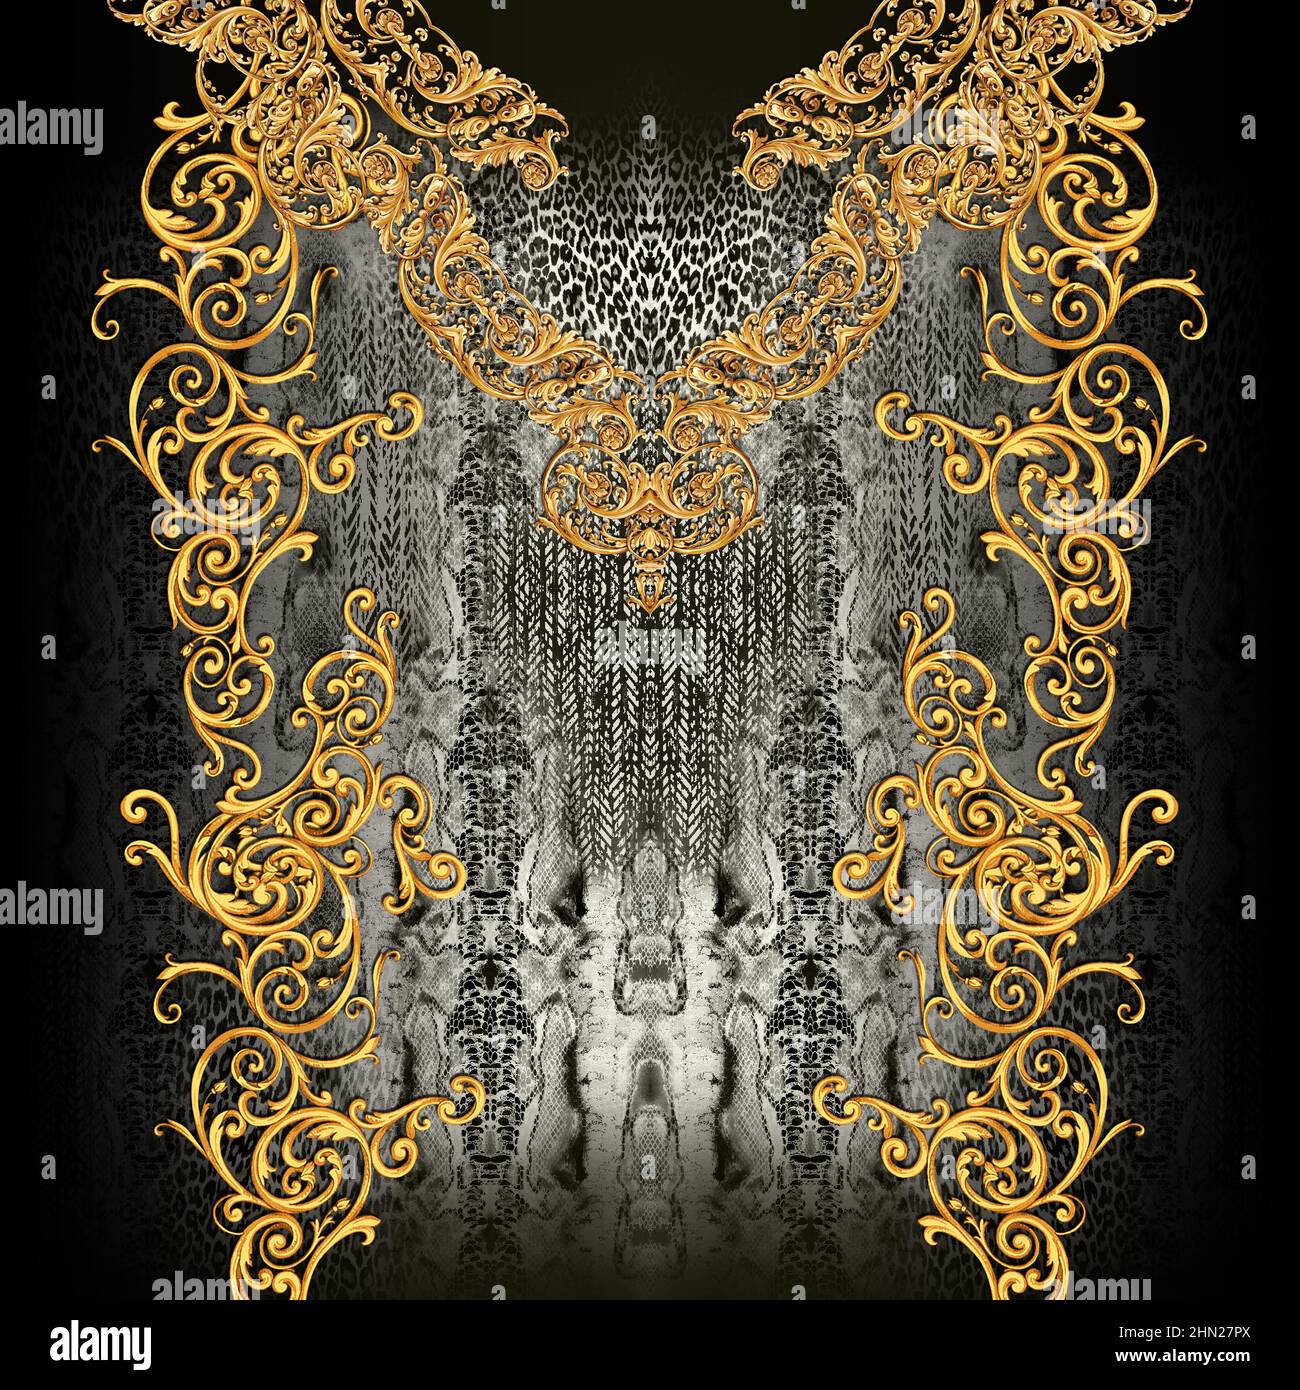 Golden Baroque with Leopard Skin on Khaki Background Ready for Textile Prints. Stock Photo